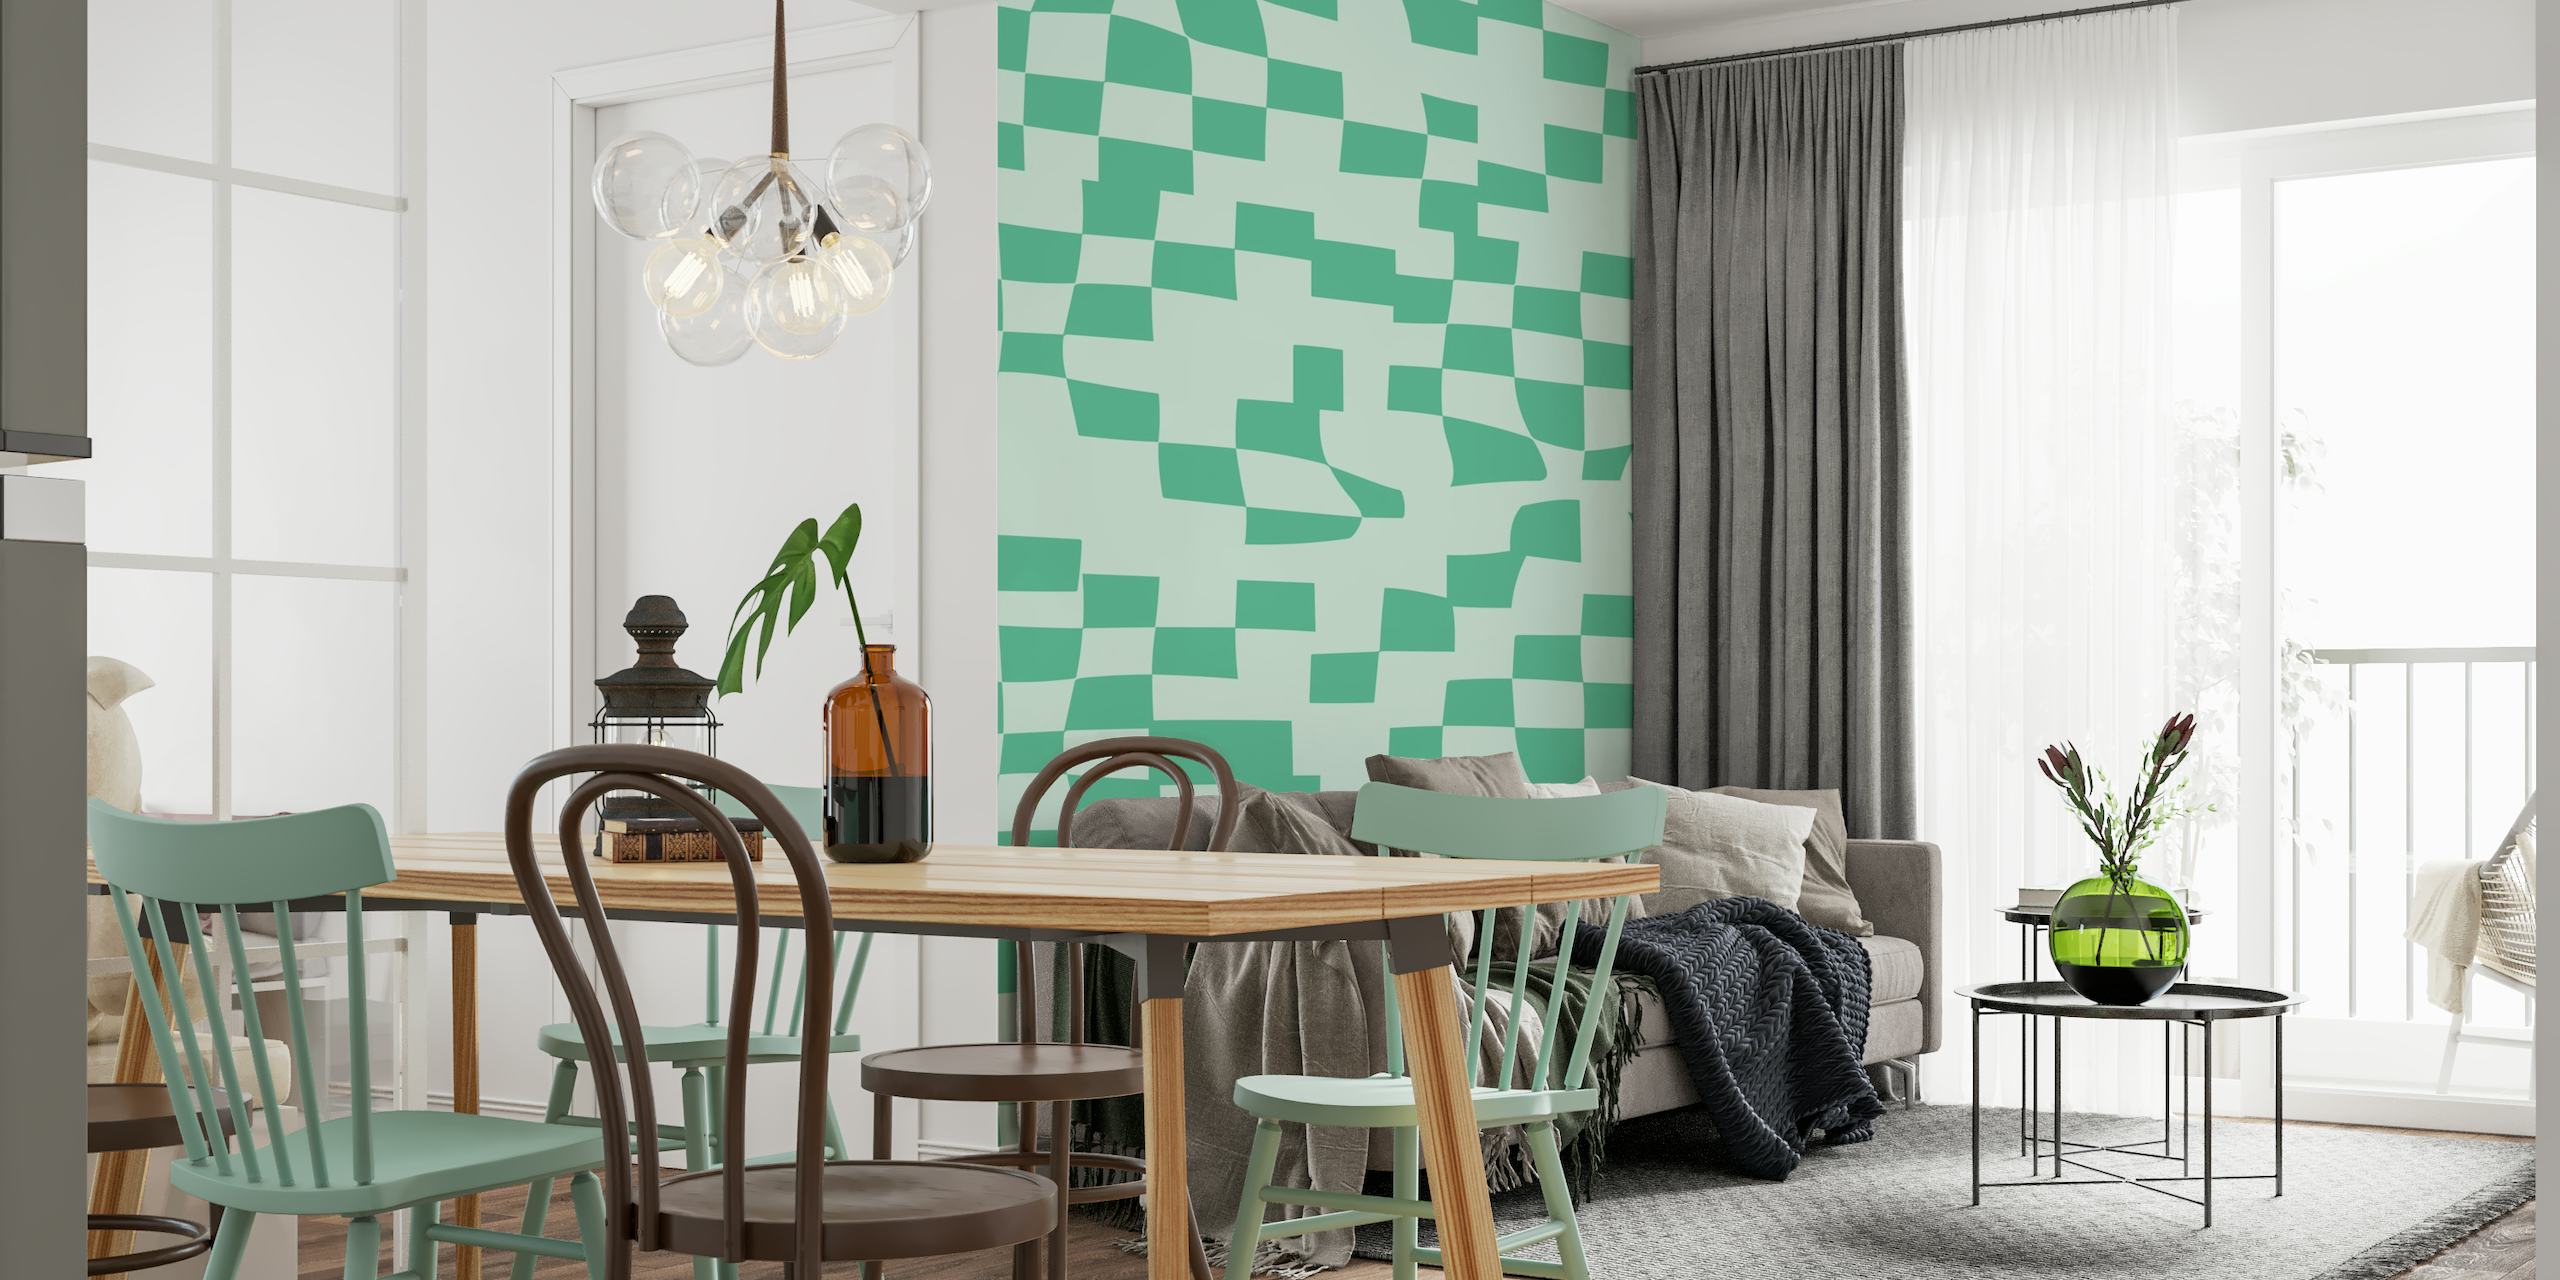 Abstract Checkerboard in Light Blue and Green behang